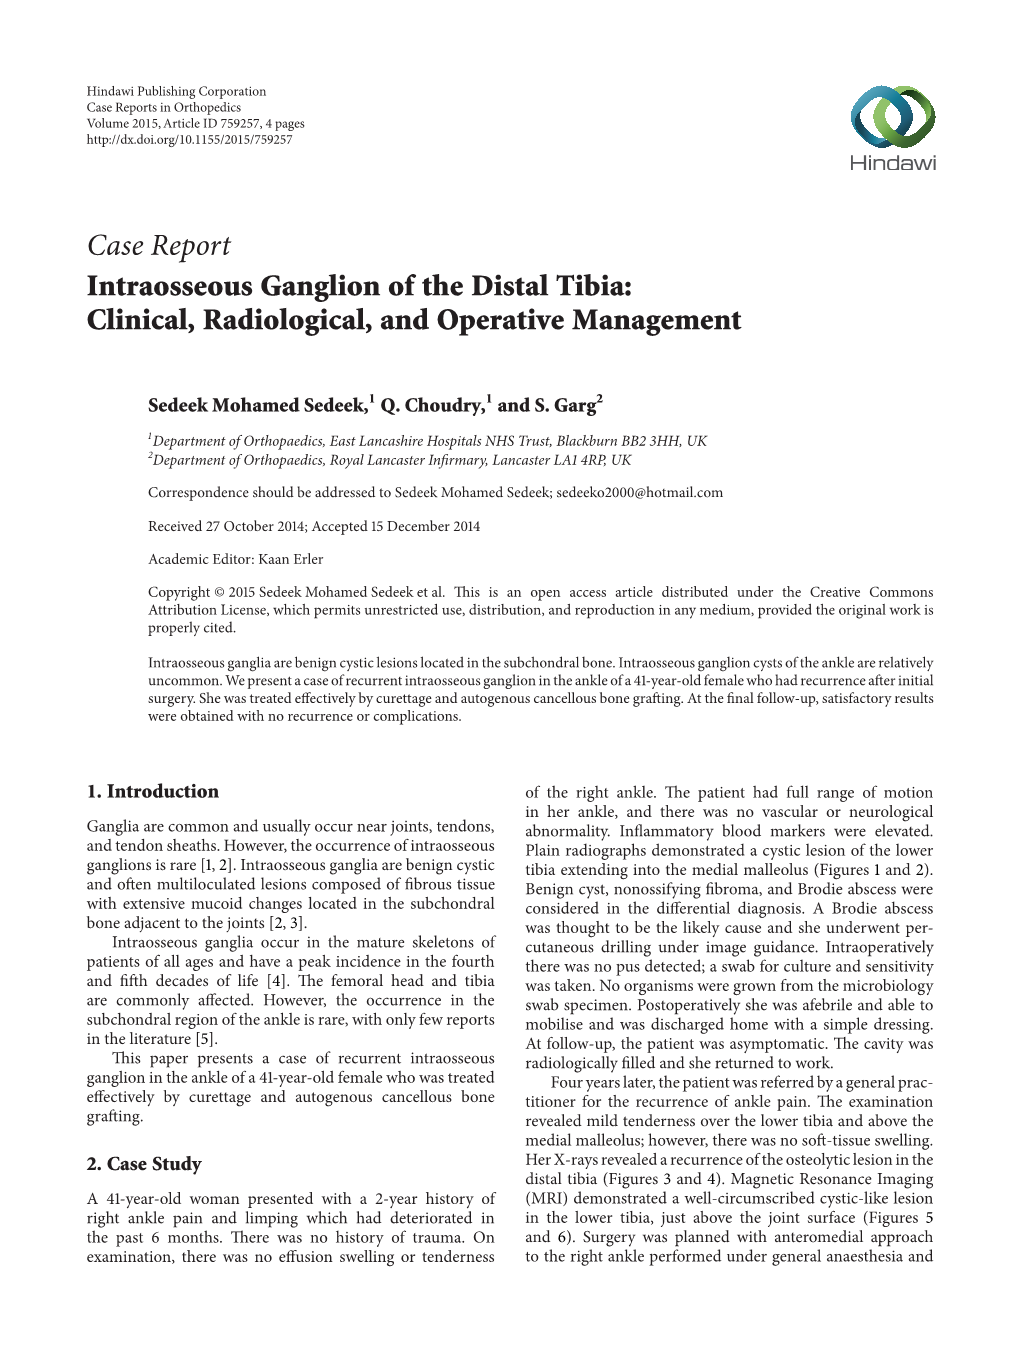 Intraosseous Ganglion of the Distal Tibia: Clinical, Radiological, and Operative Management